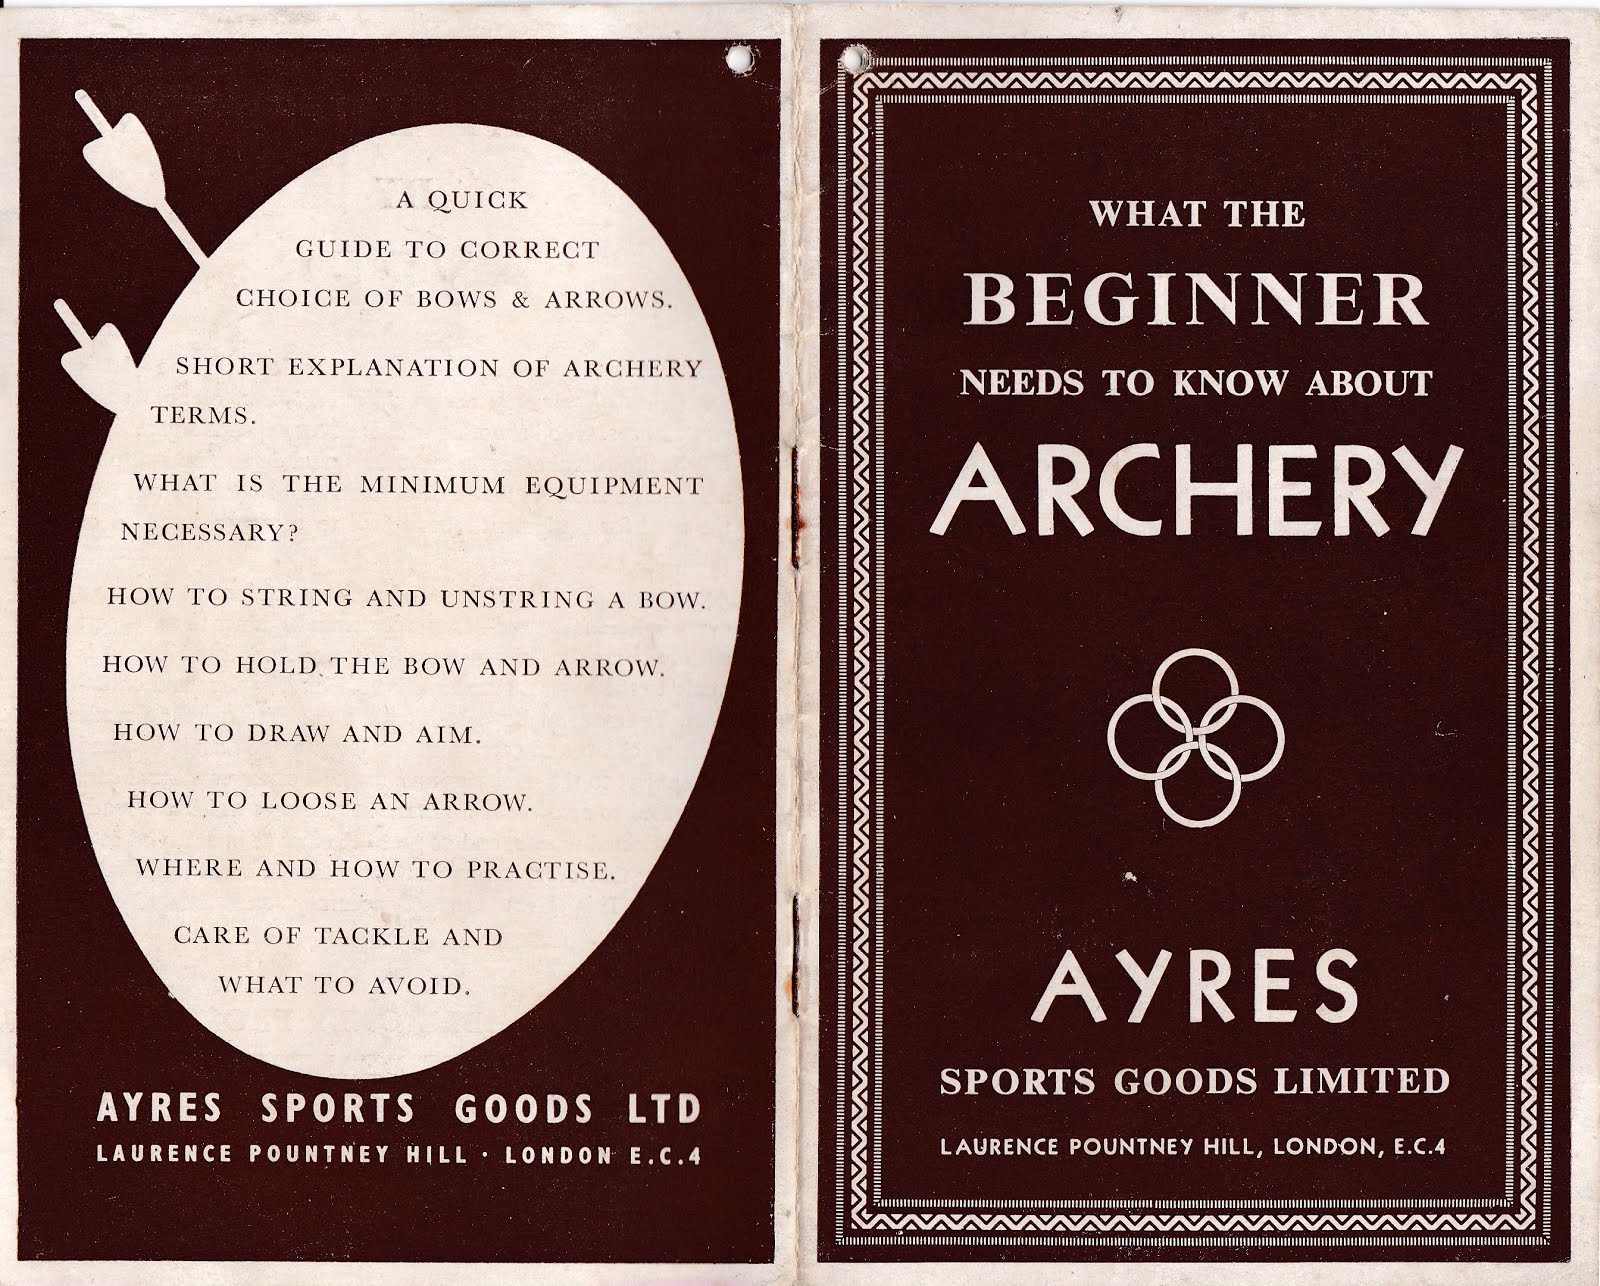 AYRES ARCHERY BEGINNER’S MANUAL FROM THE 1930’s